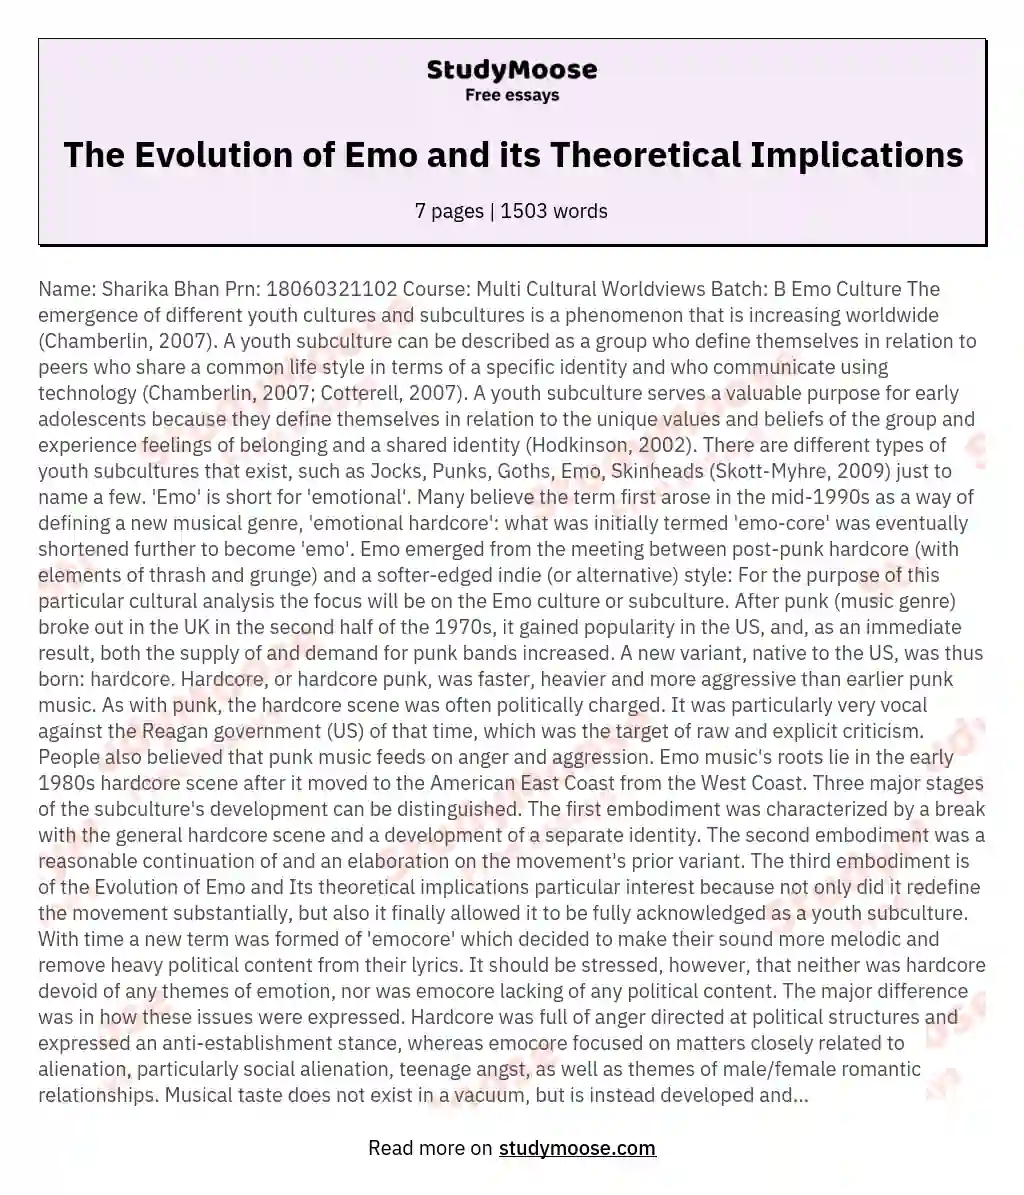 The Evolution of Emo and its Theoretical Implications essay